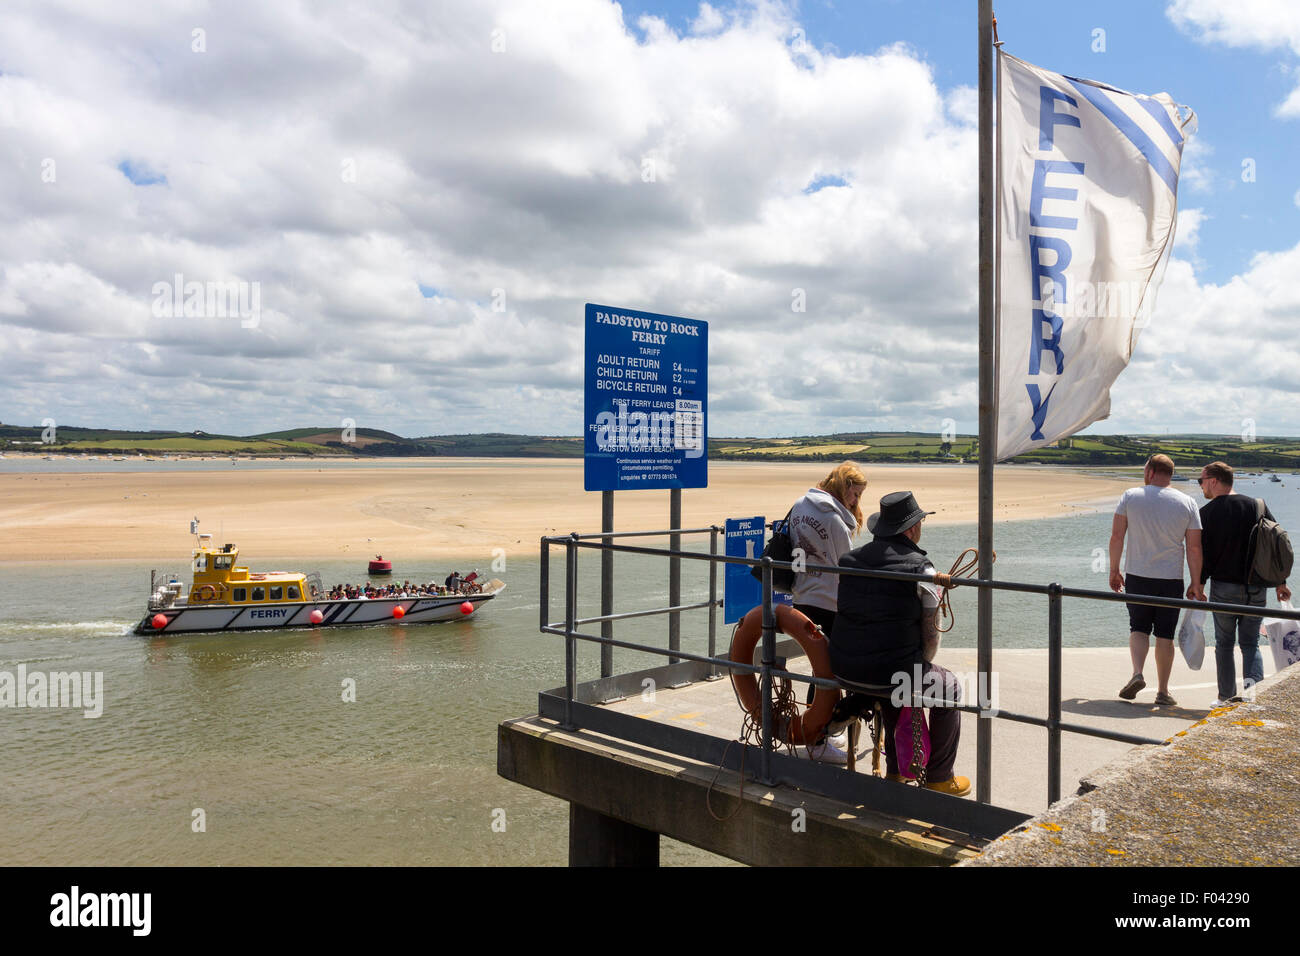 People Waiting for the Padstow to Rock Ferry, Padstow Cornwall UK Stock Photo